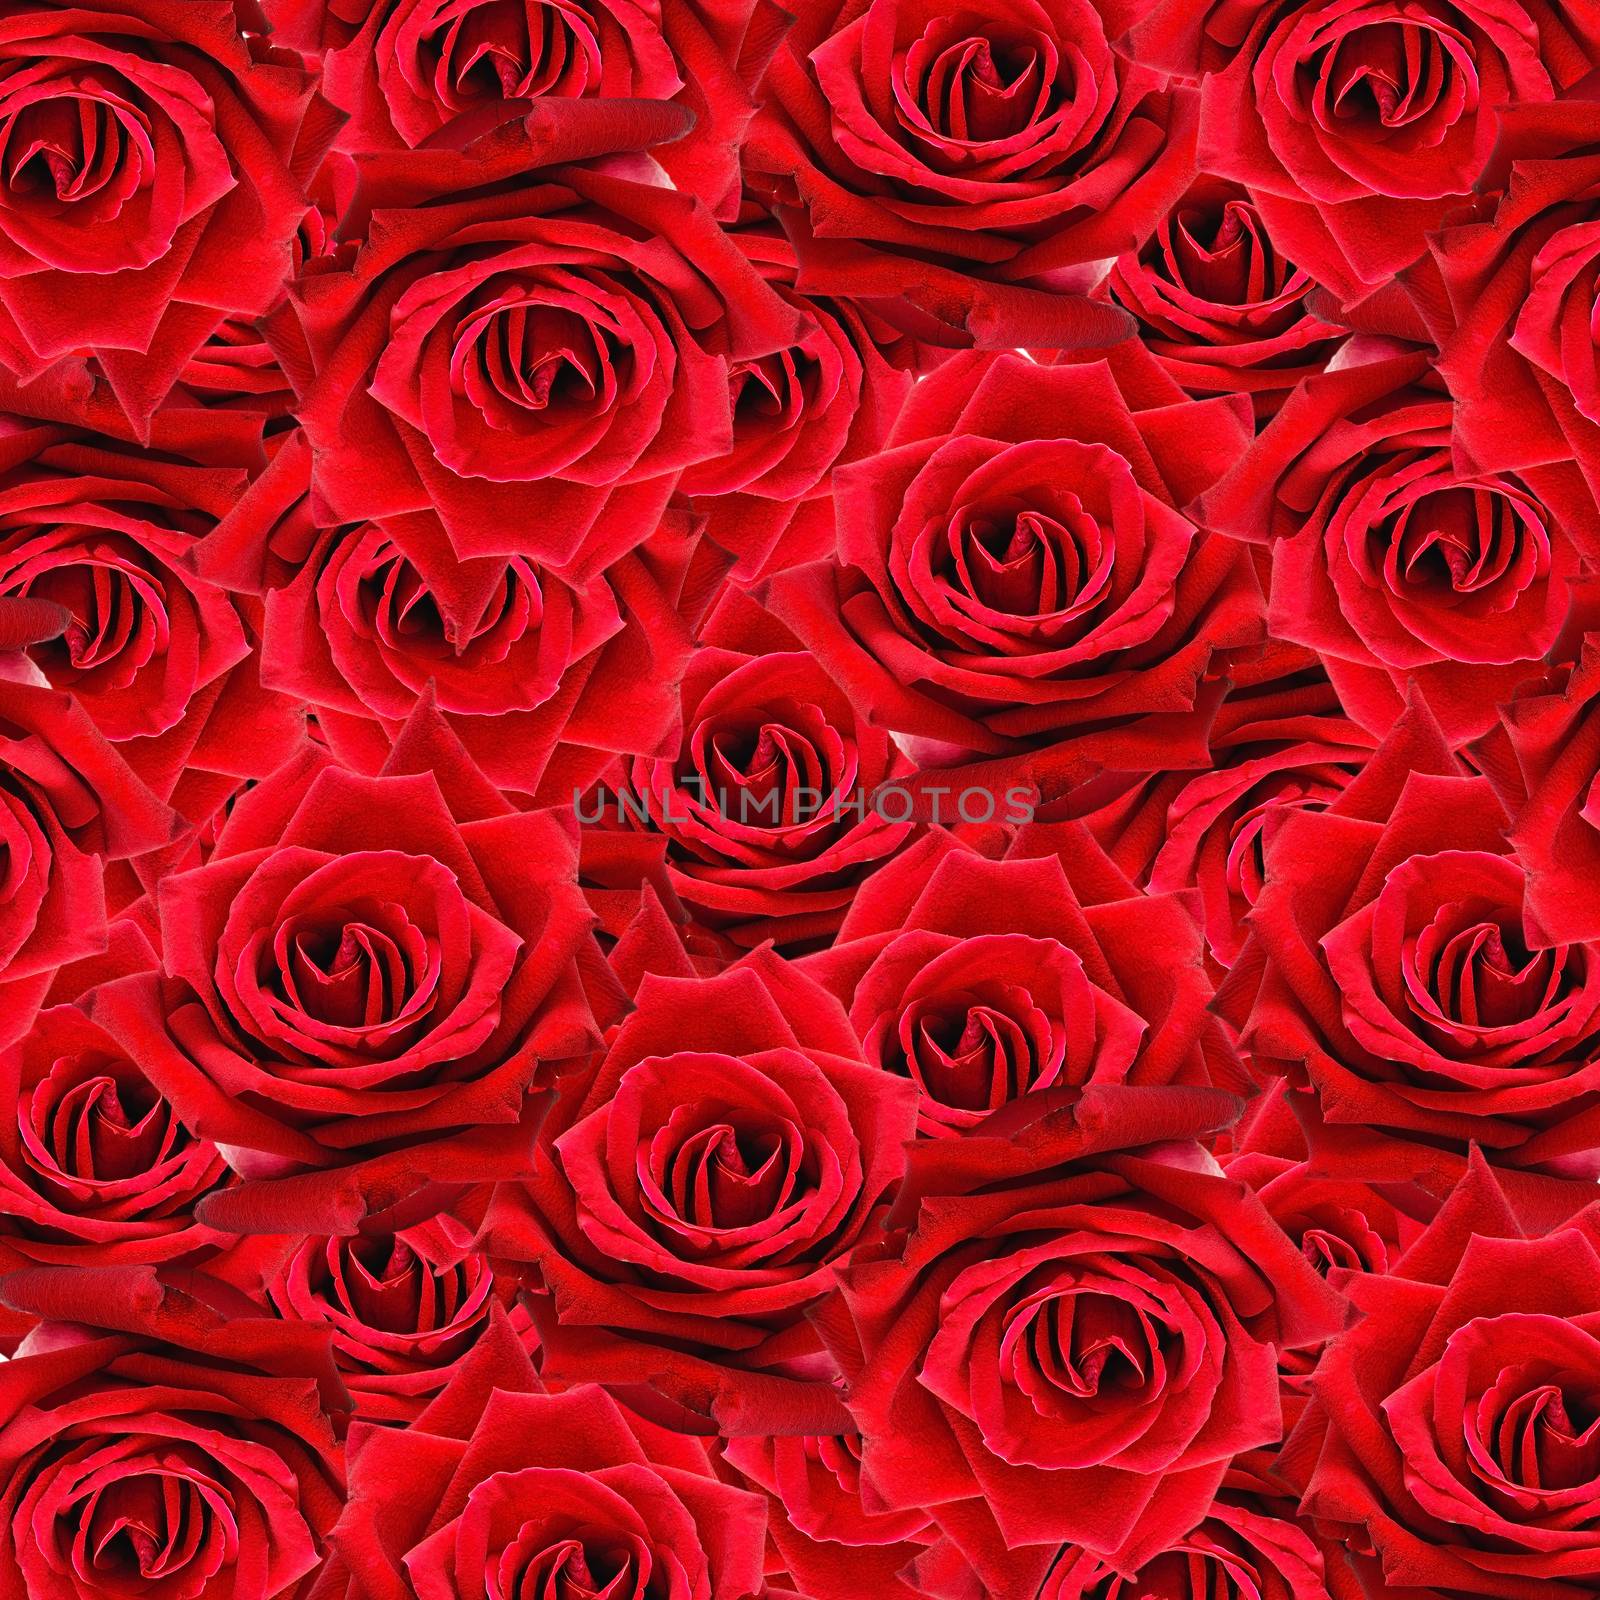 Beautiful red rose pattern, nature flower abstract background